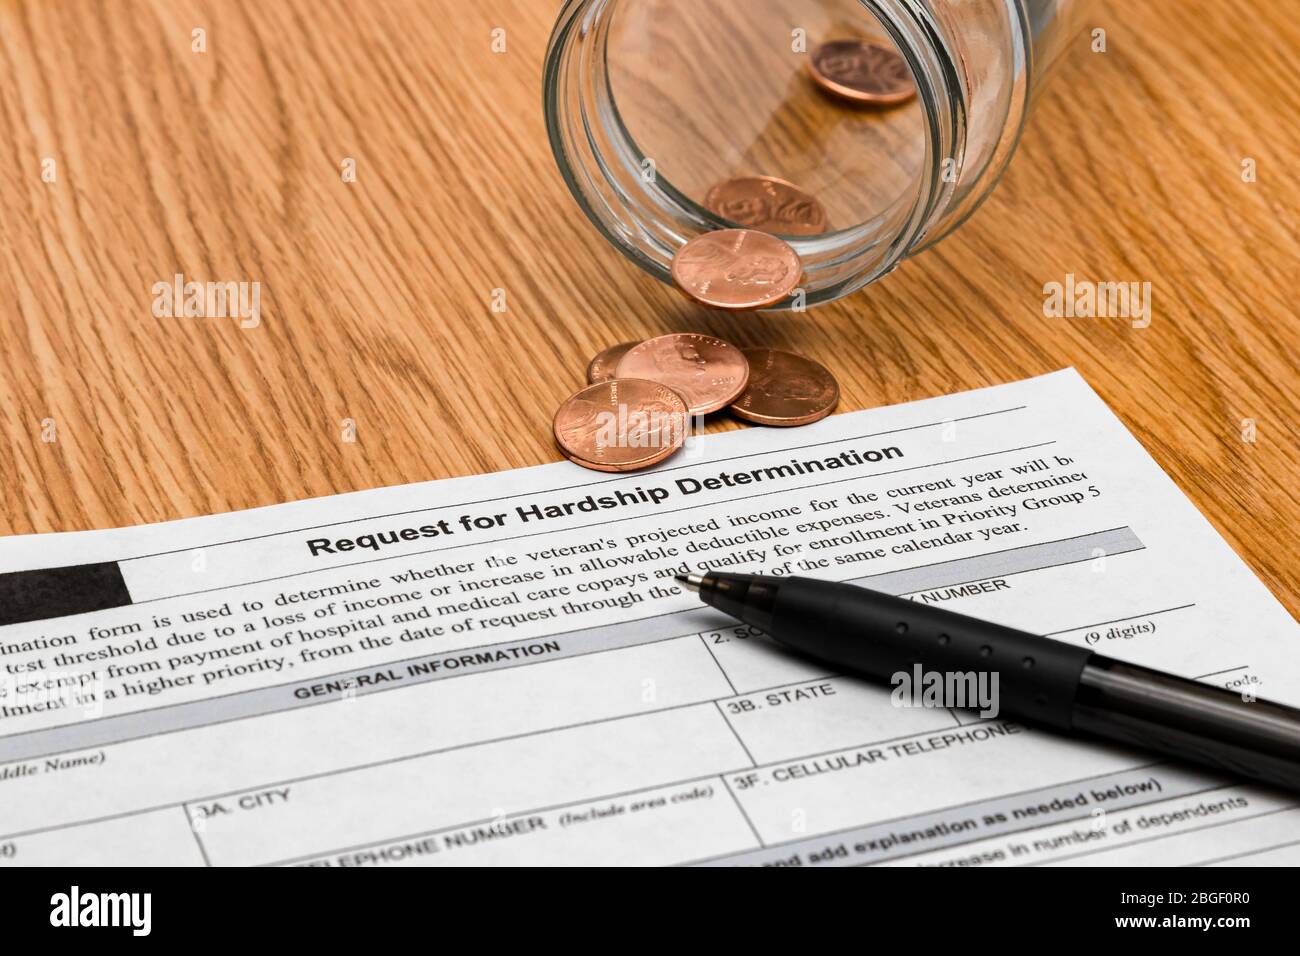 Financial hardship application, empty savings jar and coins. Concept of unemployment, recession and debt during Covid-19 coronavirus pandemic Stock Photo